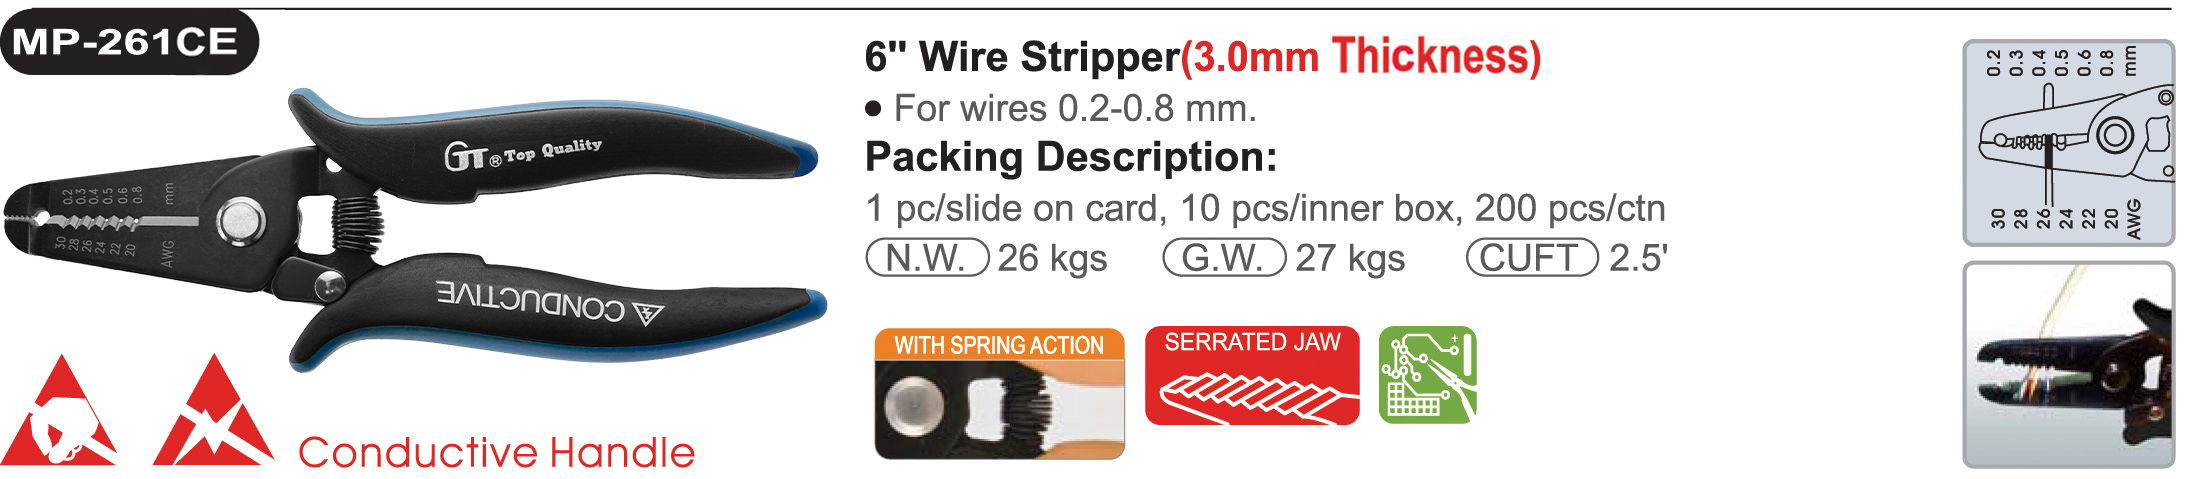 proimages/product/pliers/wire_strippers/ELECTRONICS_WIRE_STRIPPER_ESD/MP-261CE/MP-261CE.jpg